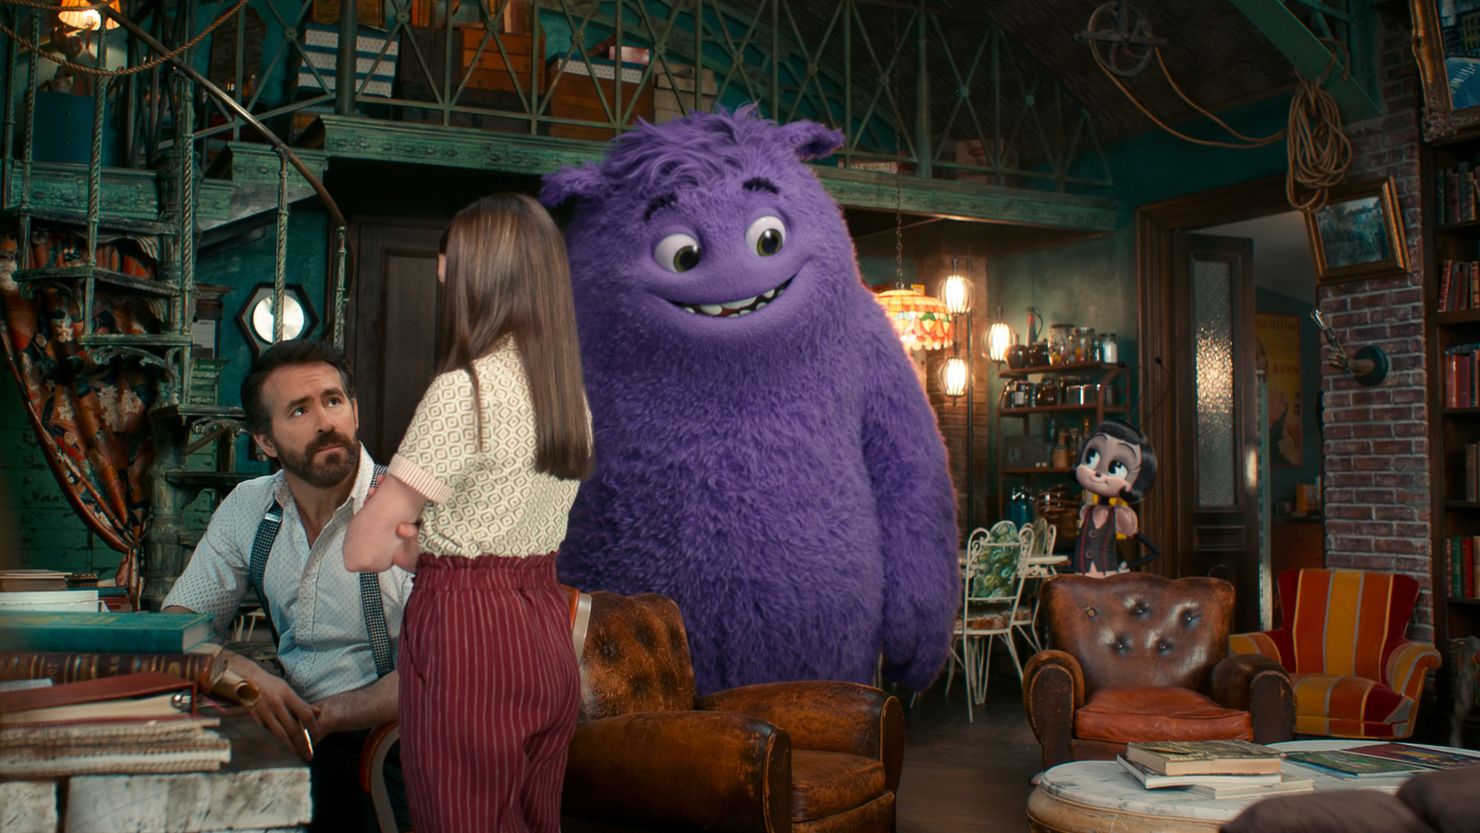 Ryan Reynolds, Cailey Fleming, Blue (voiced by Steve Carell (Blue) and Blossom (voiced by Phoebe Waller-Bridge) in "IF."